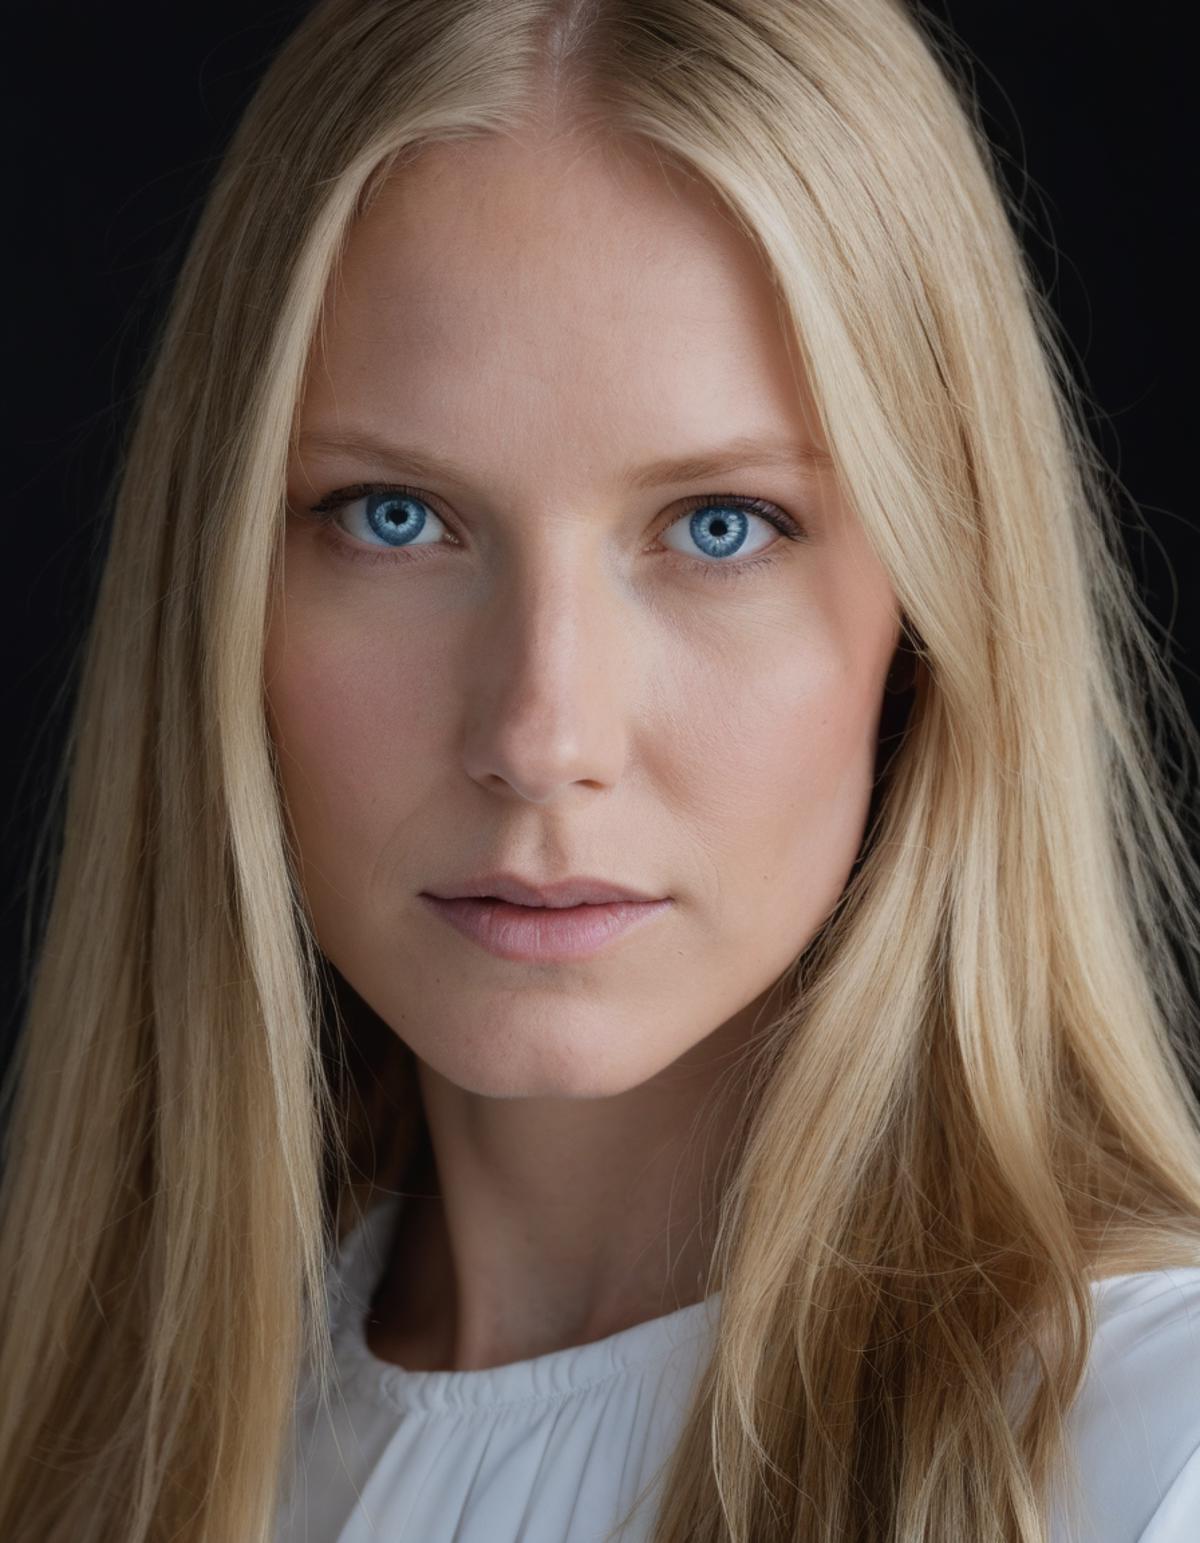 A close-up of a beautiful blonde woman with blue eyes and white shirt.